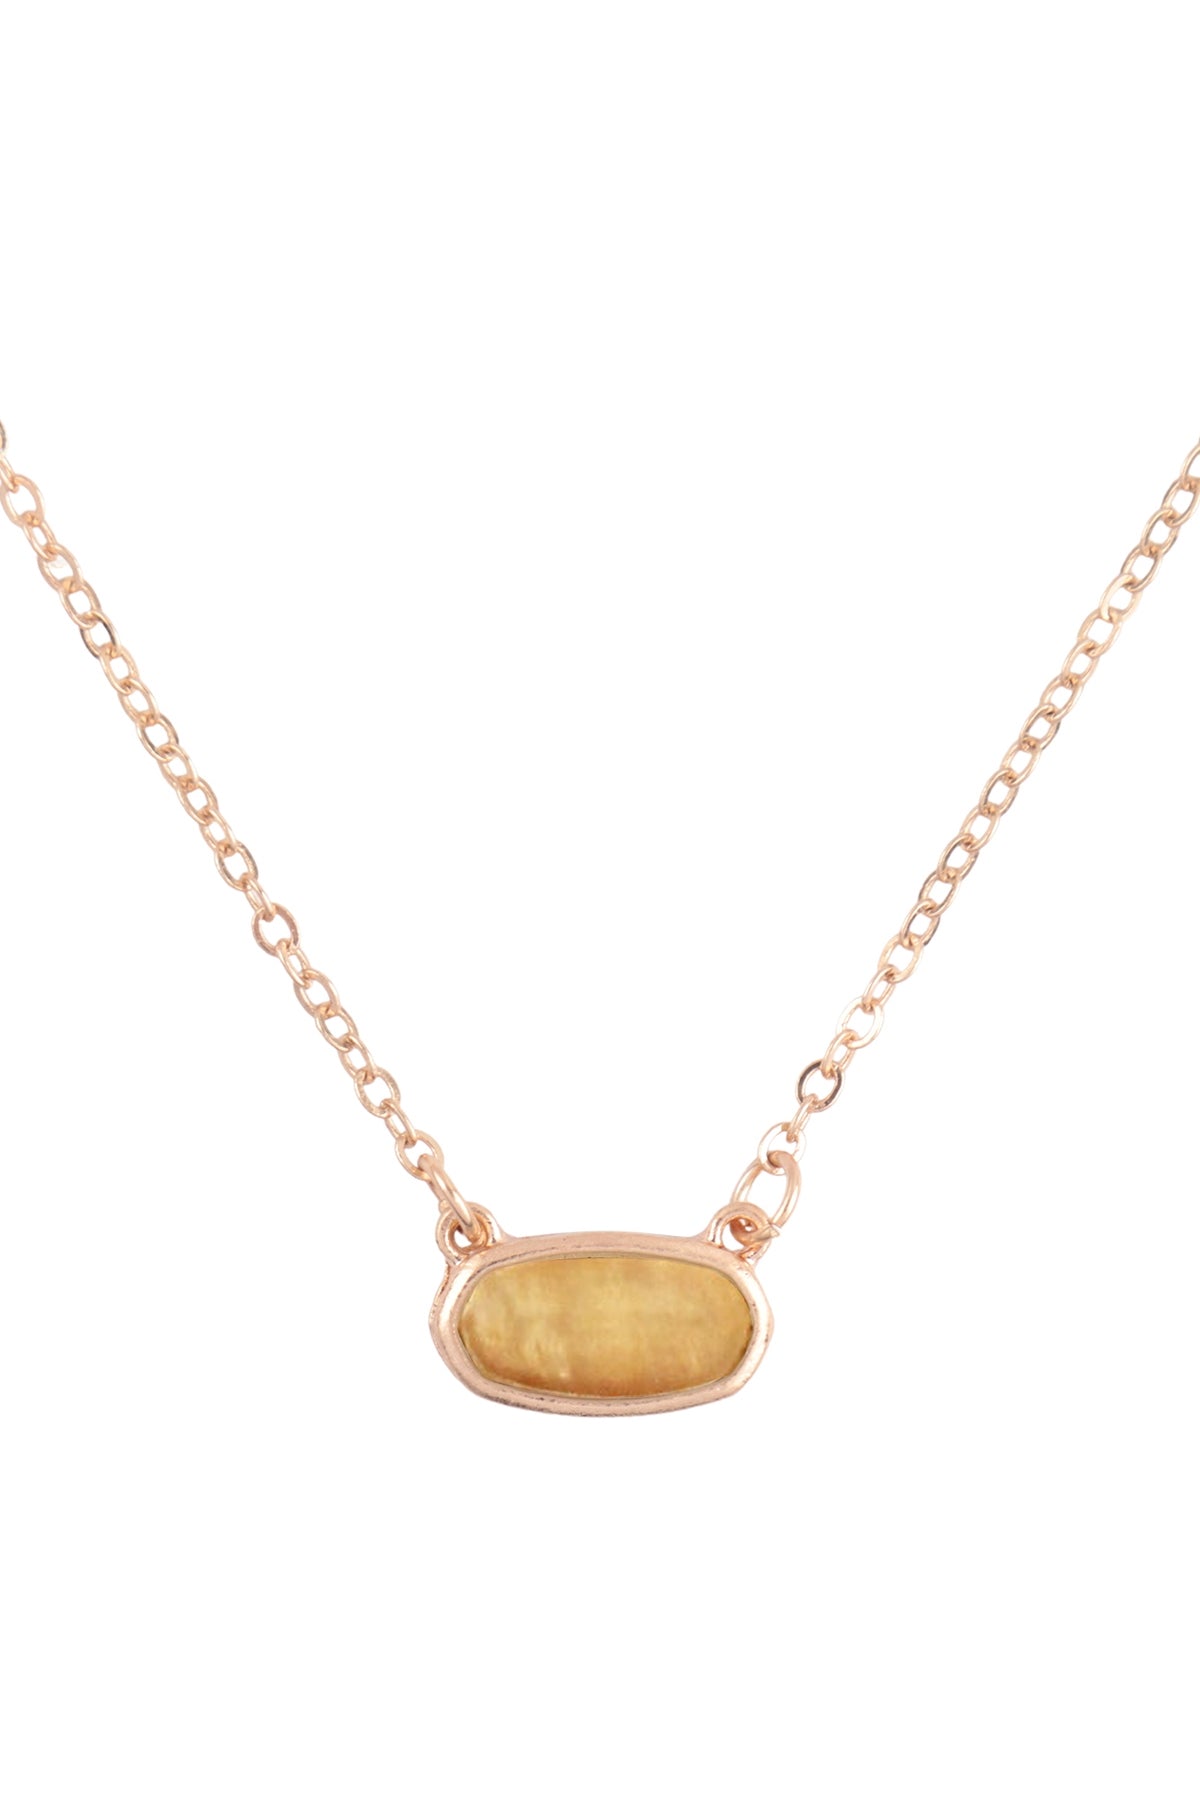 NATURAL STONE OVAL PENDANT NECKLACE